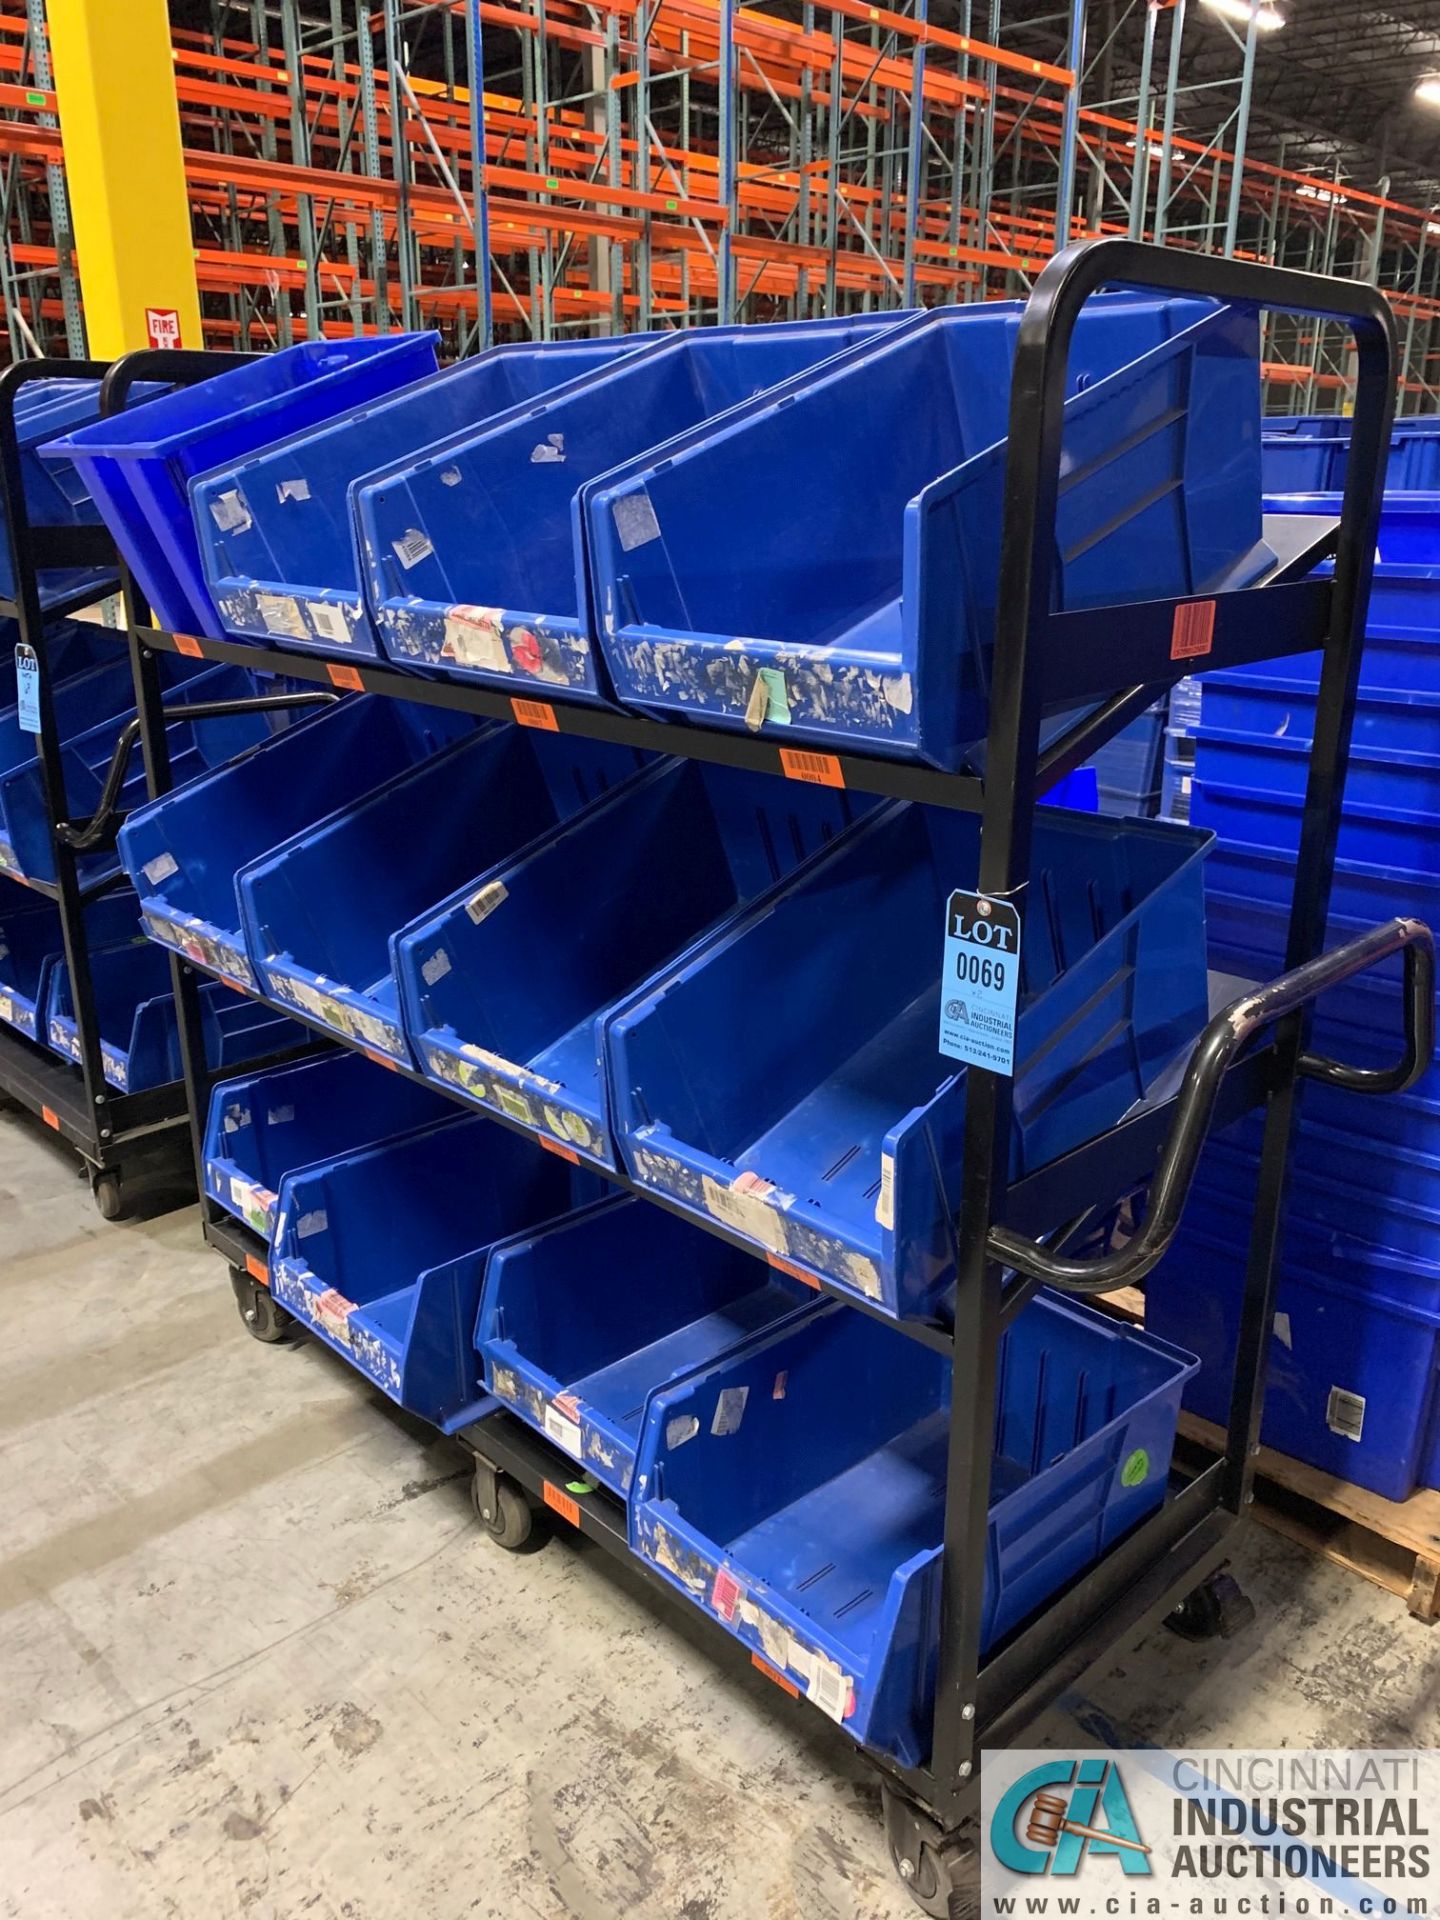 26" X 66" X 68" HIGH PORTABLE SLANT SHELF PICK CARTS WITH TOTES - Image 2 of 3